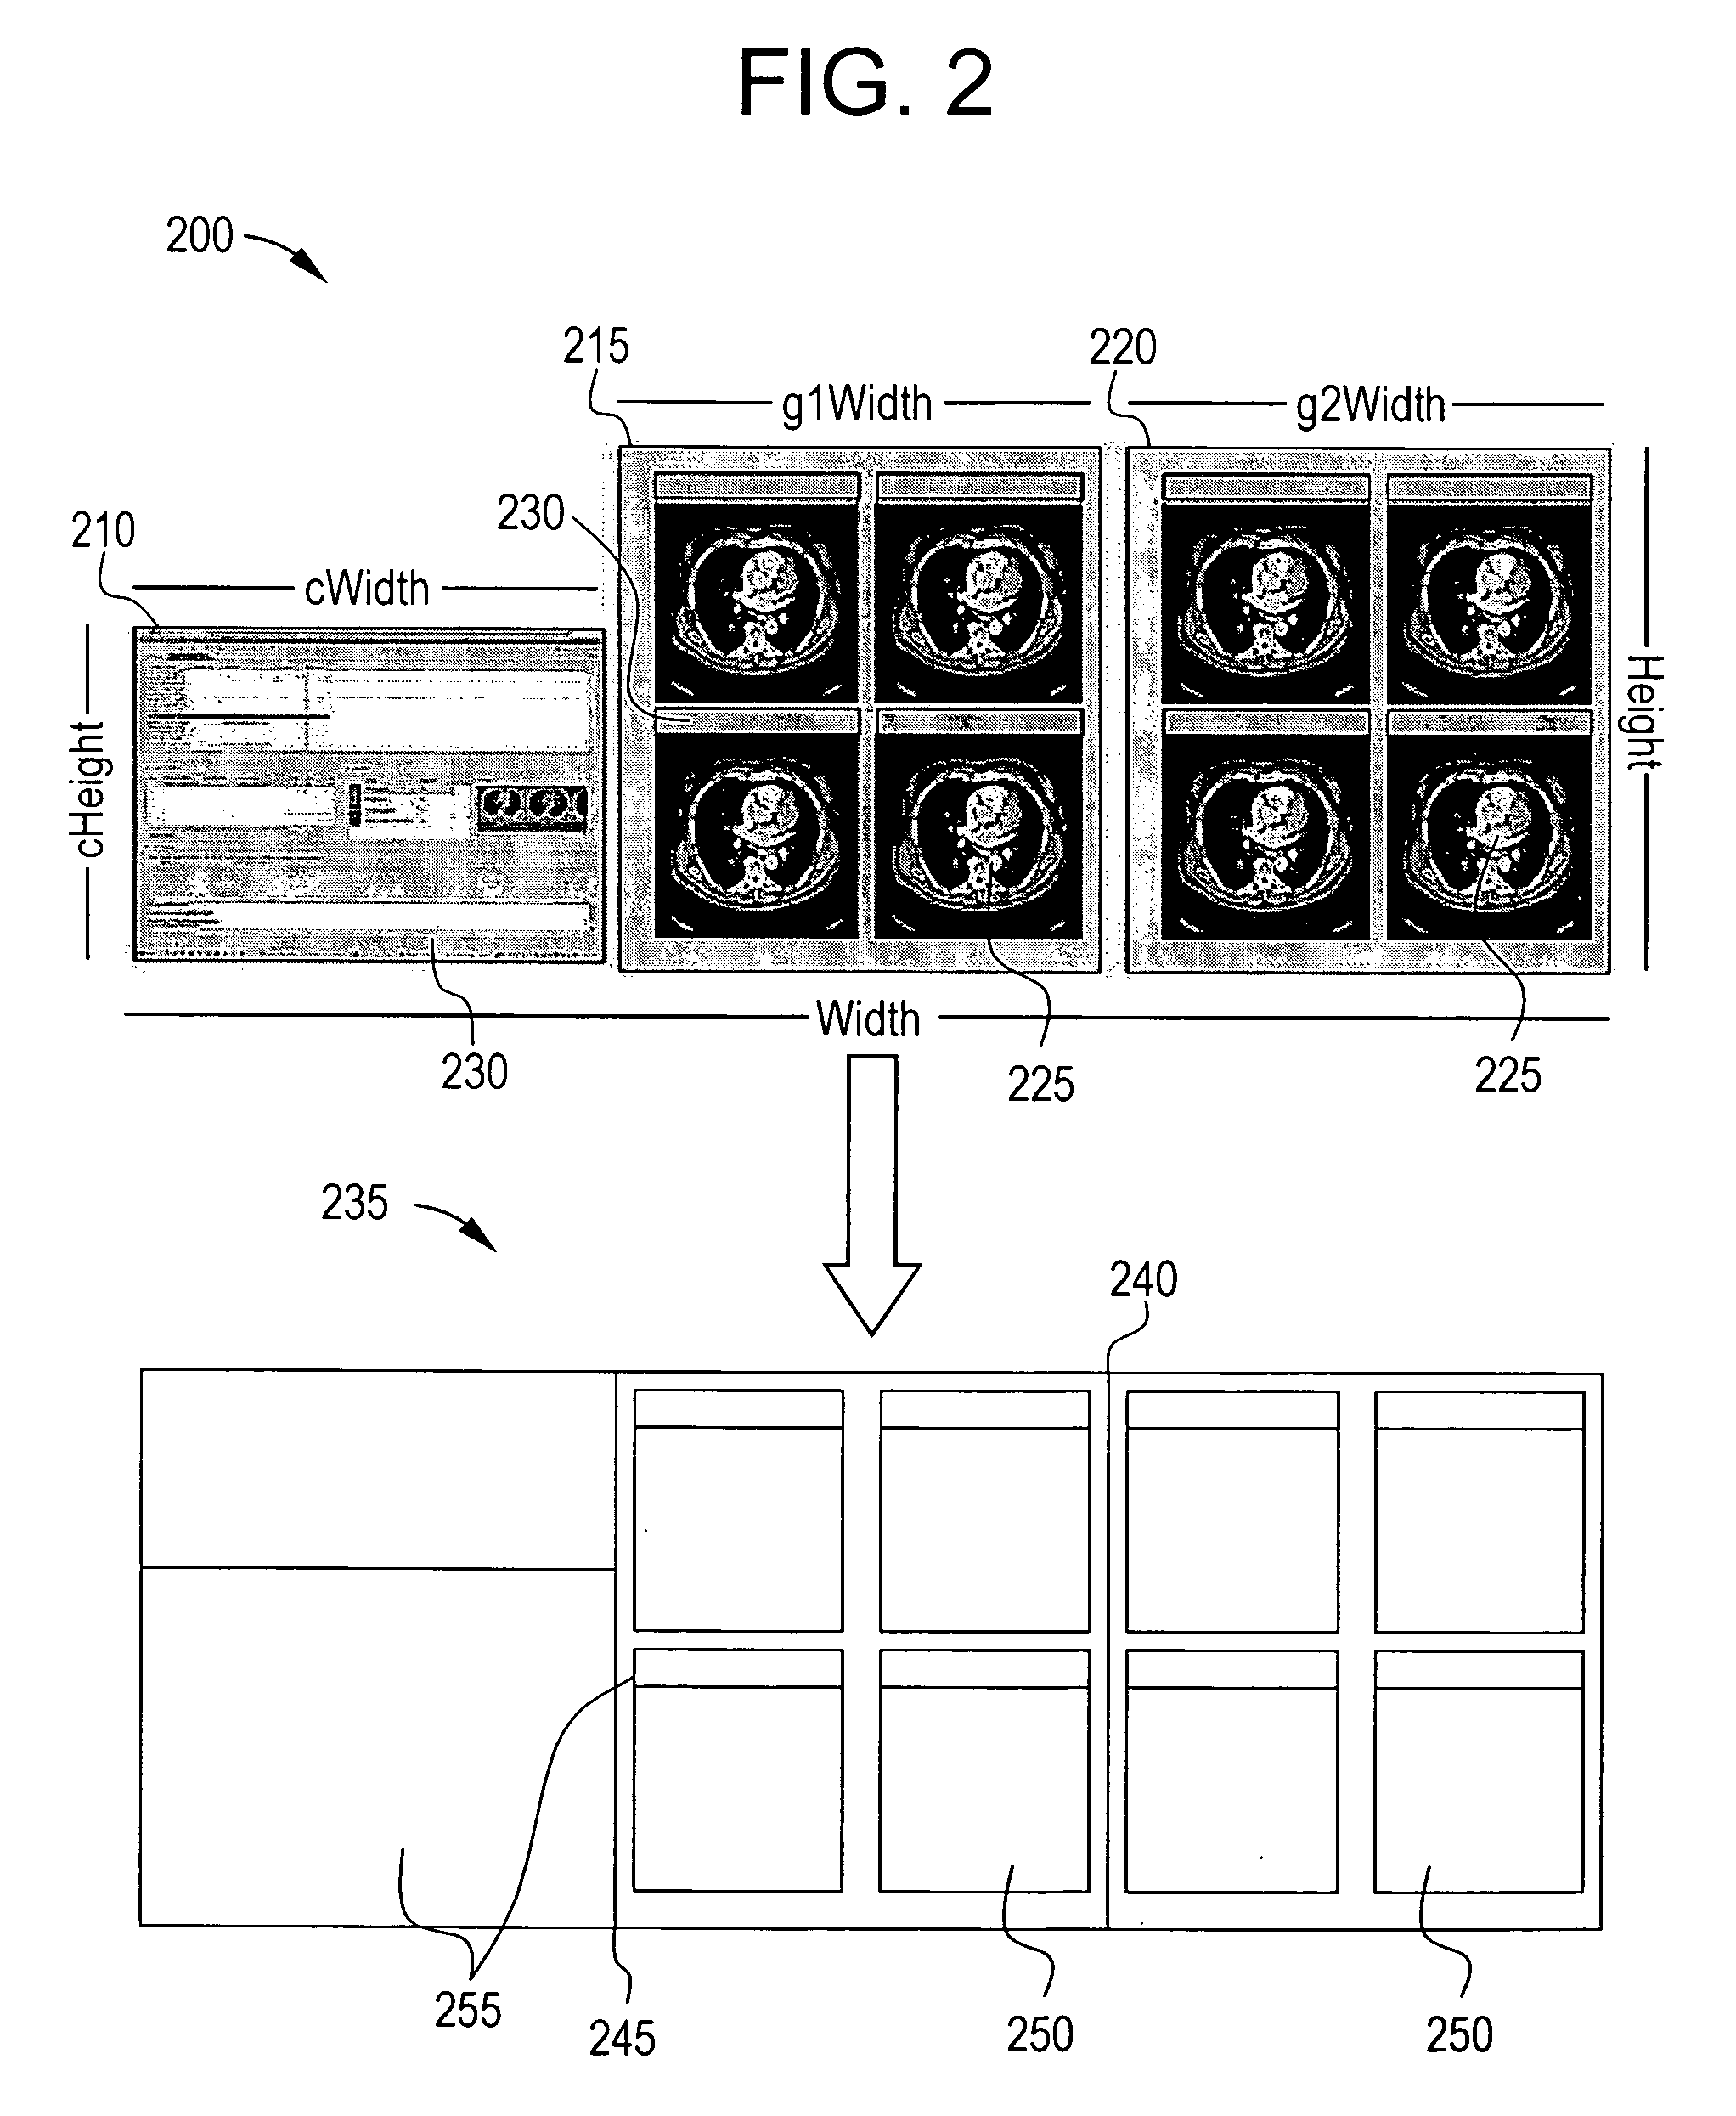 Systems and methods for image sharing in a healthcare setting while maintaining diagnostic image quality